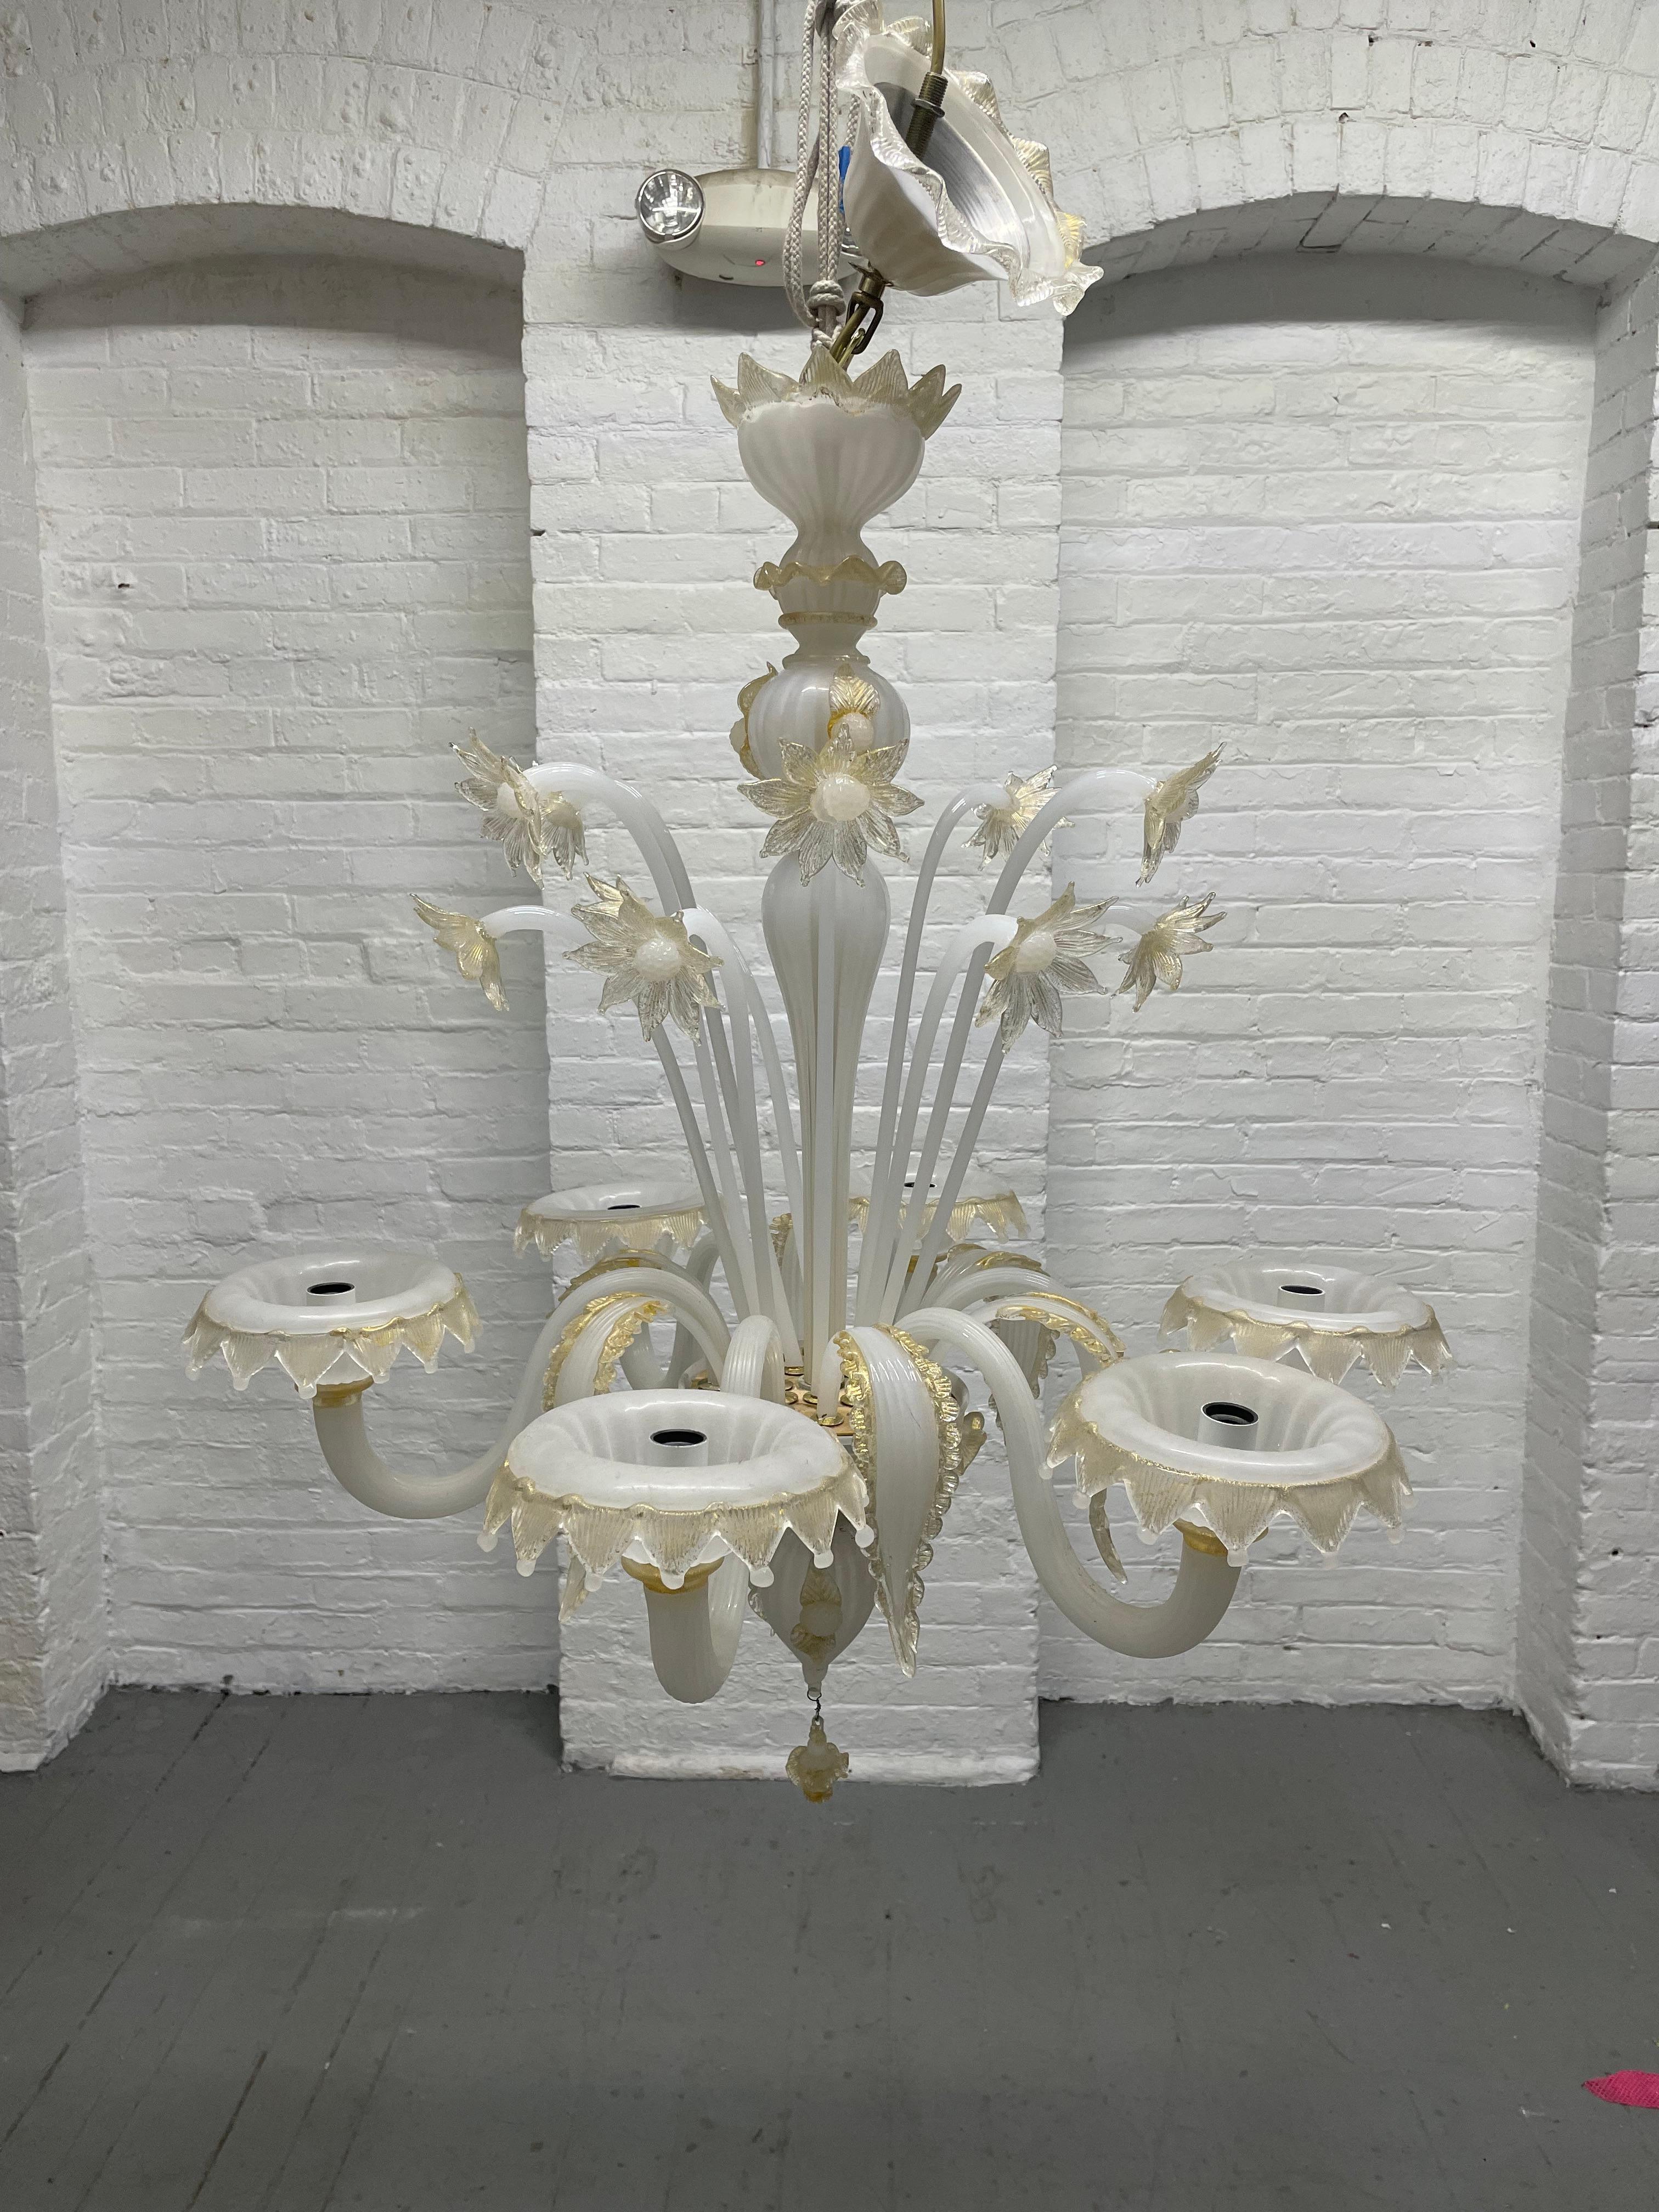 Murano glass chandelier with floral pattern. Has gold and off white petals and leaves.